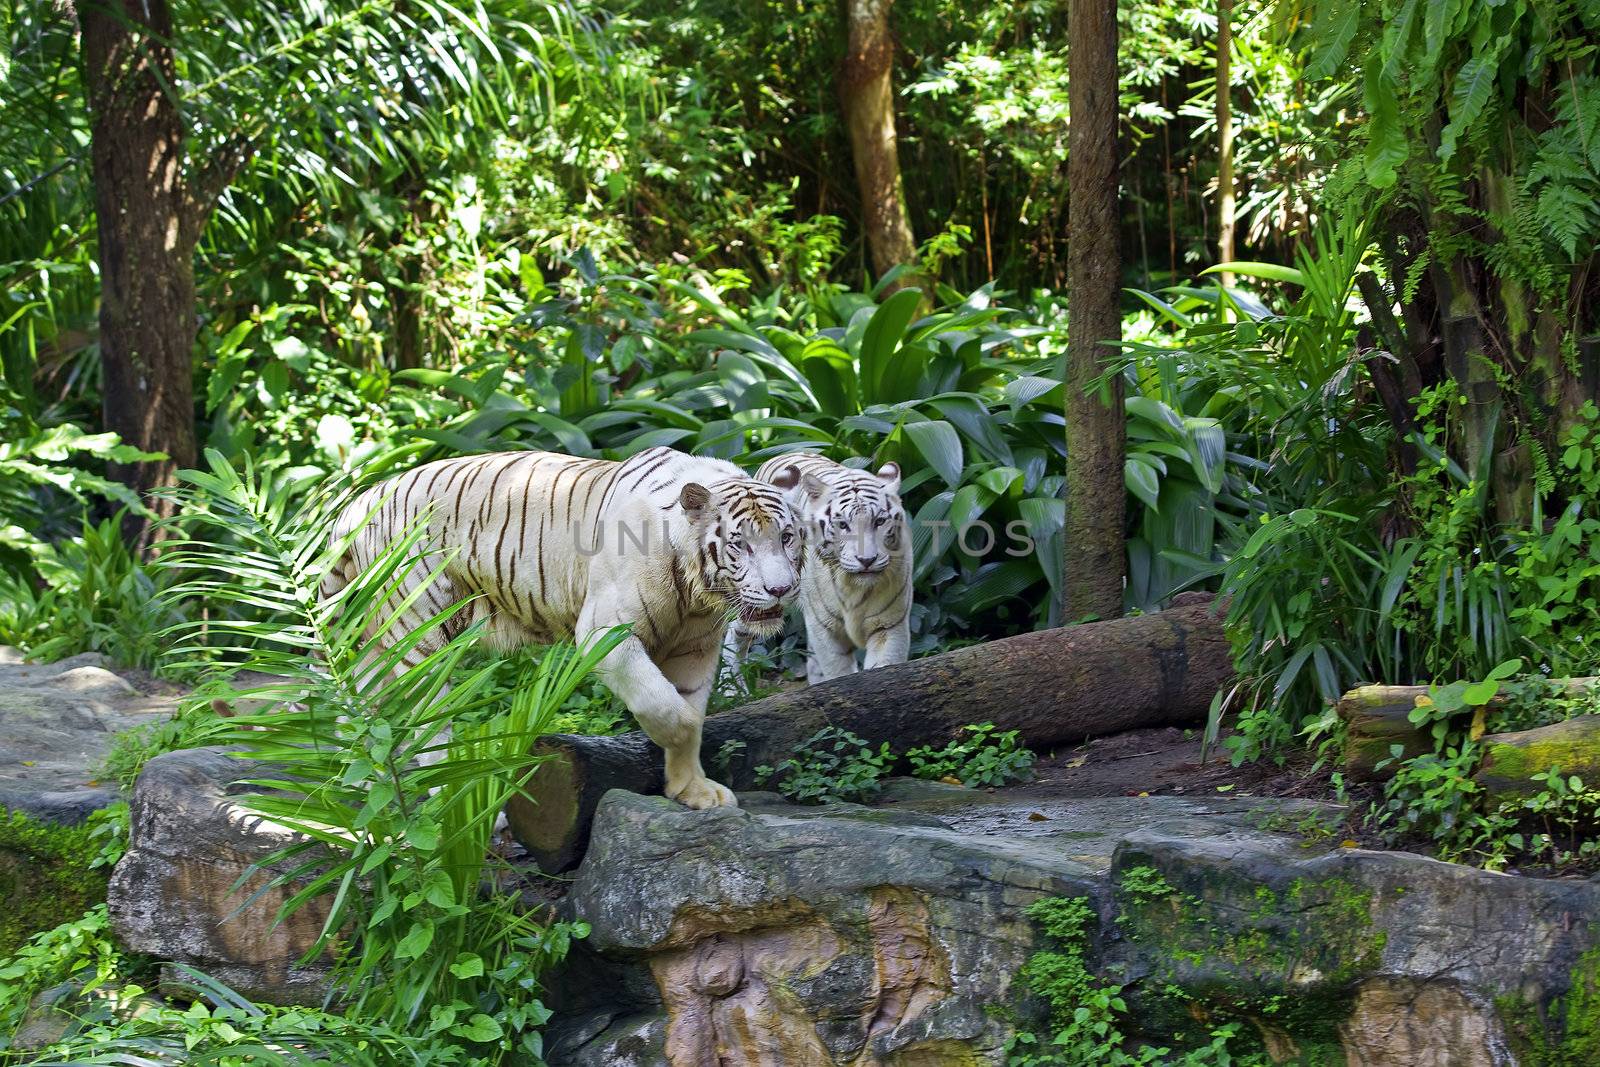 Two white tigers in a tropical forest